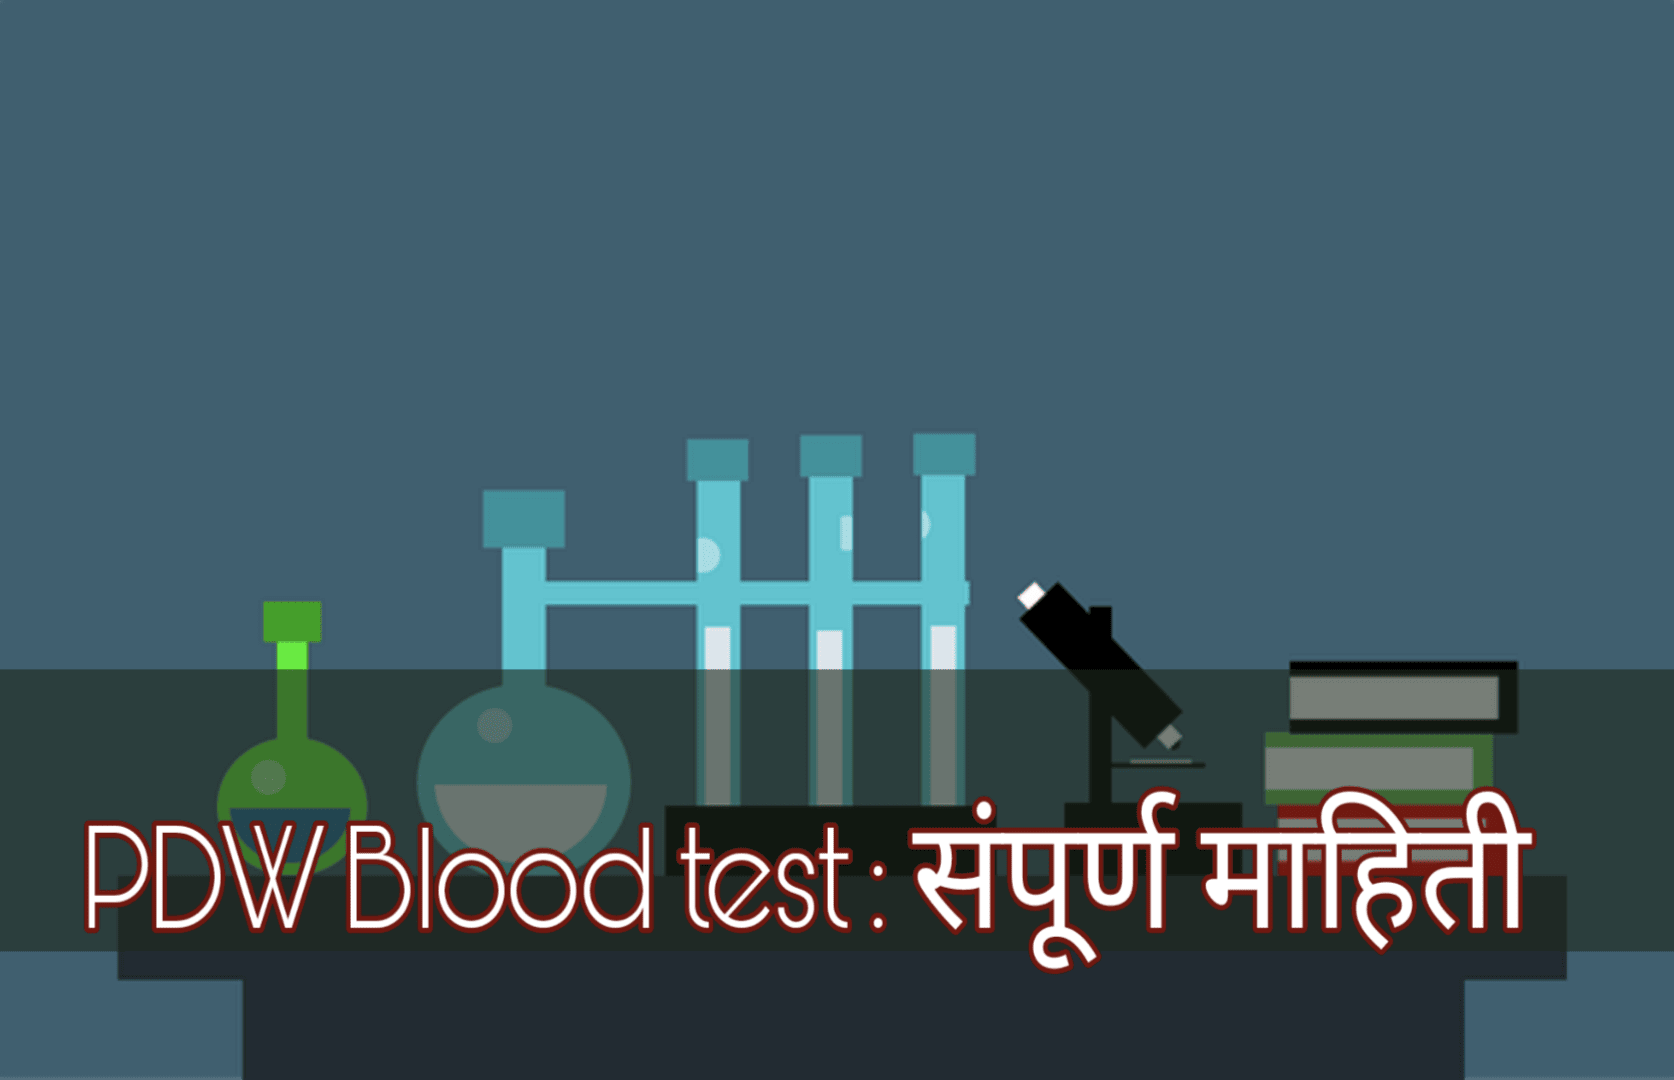 PDW Blood test in Hindi